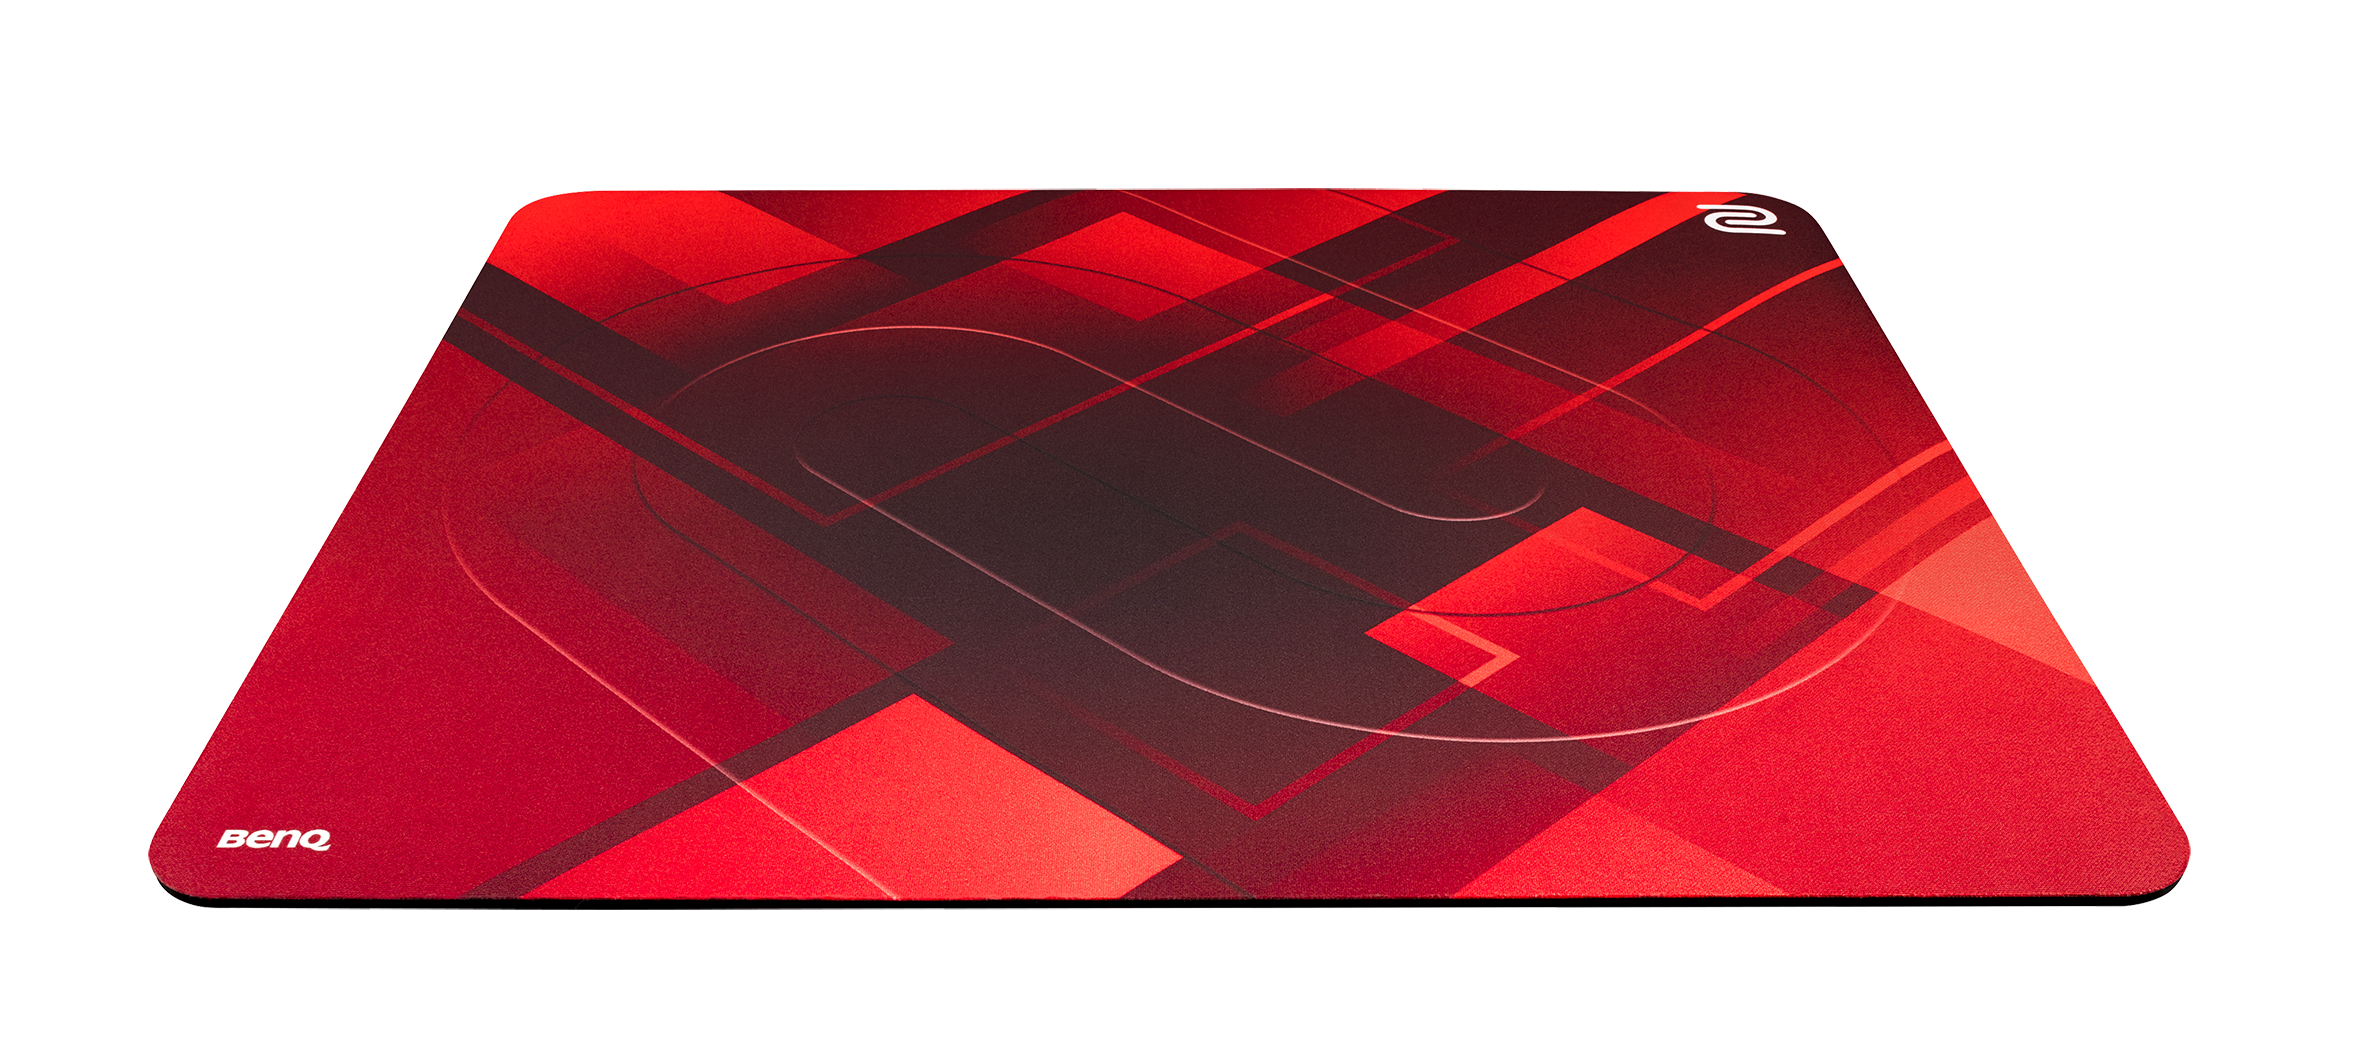 Asia Pacific announces G-SR-SE Red Esports Mousepads is now in Asia regions. | ZOWIE Pacific